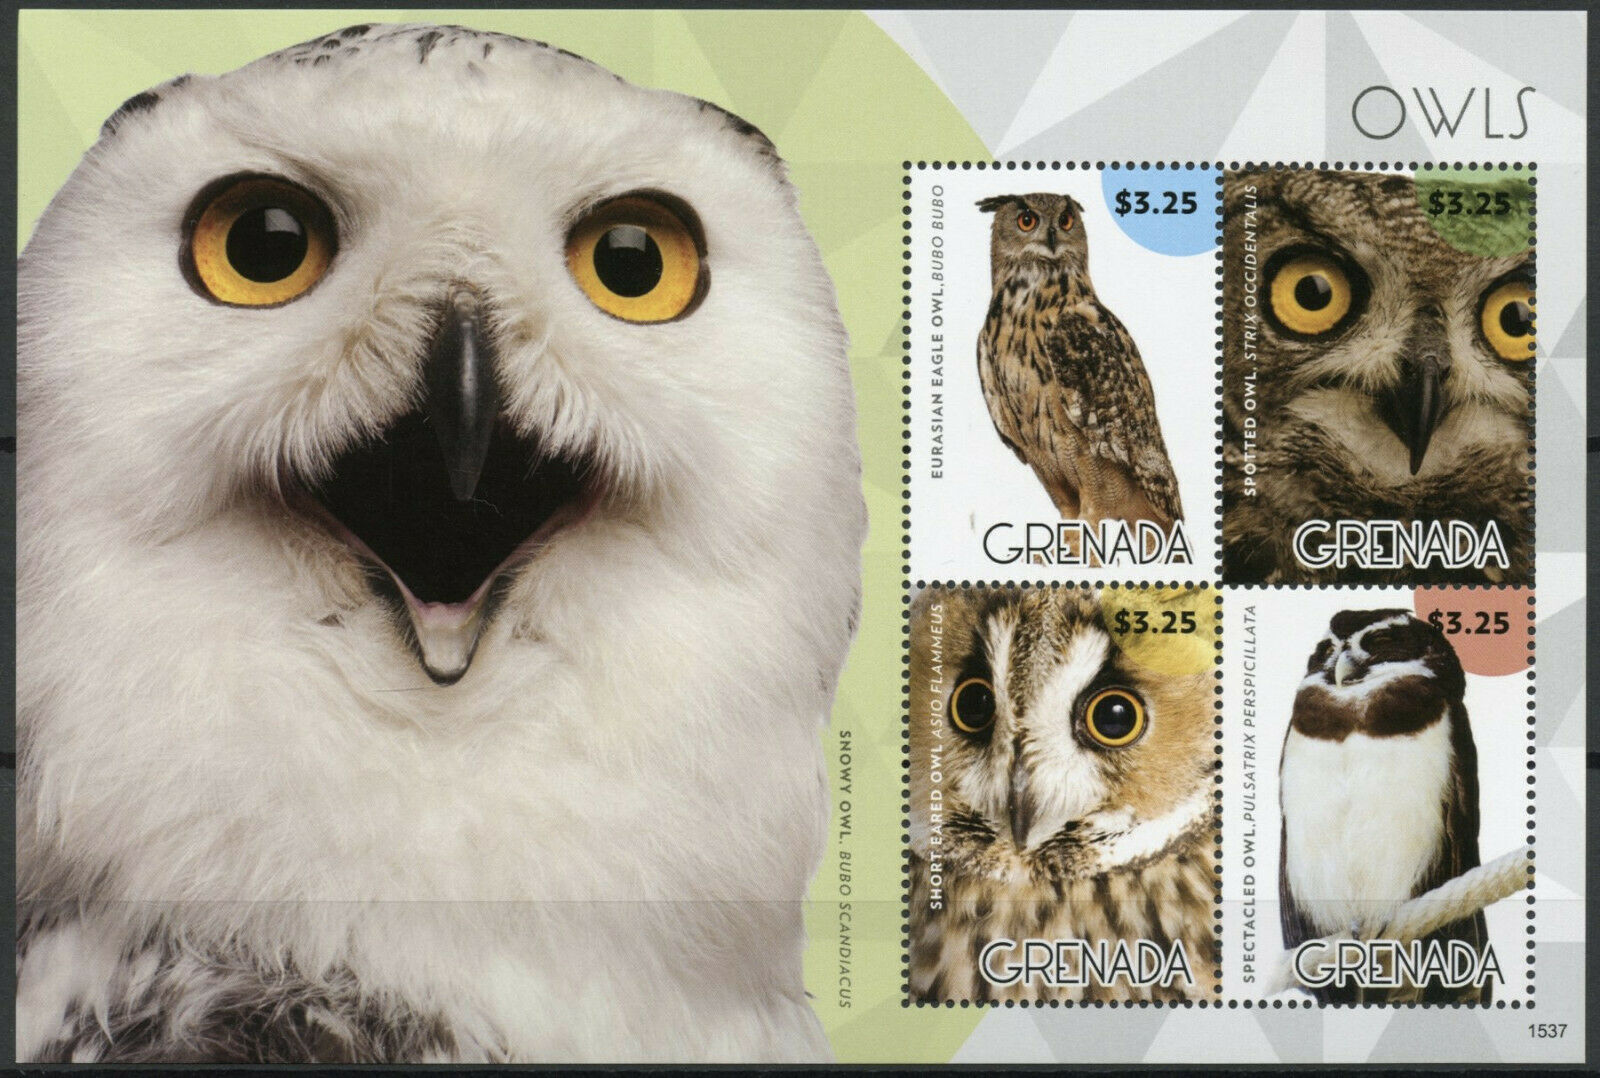 Grenada 2015 MNH Birds of Prey on Stamps Owls Spotted Spectacled Eagle Owl 4v M/S II